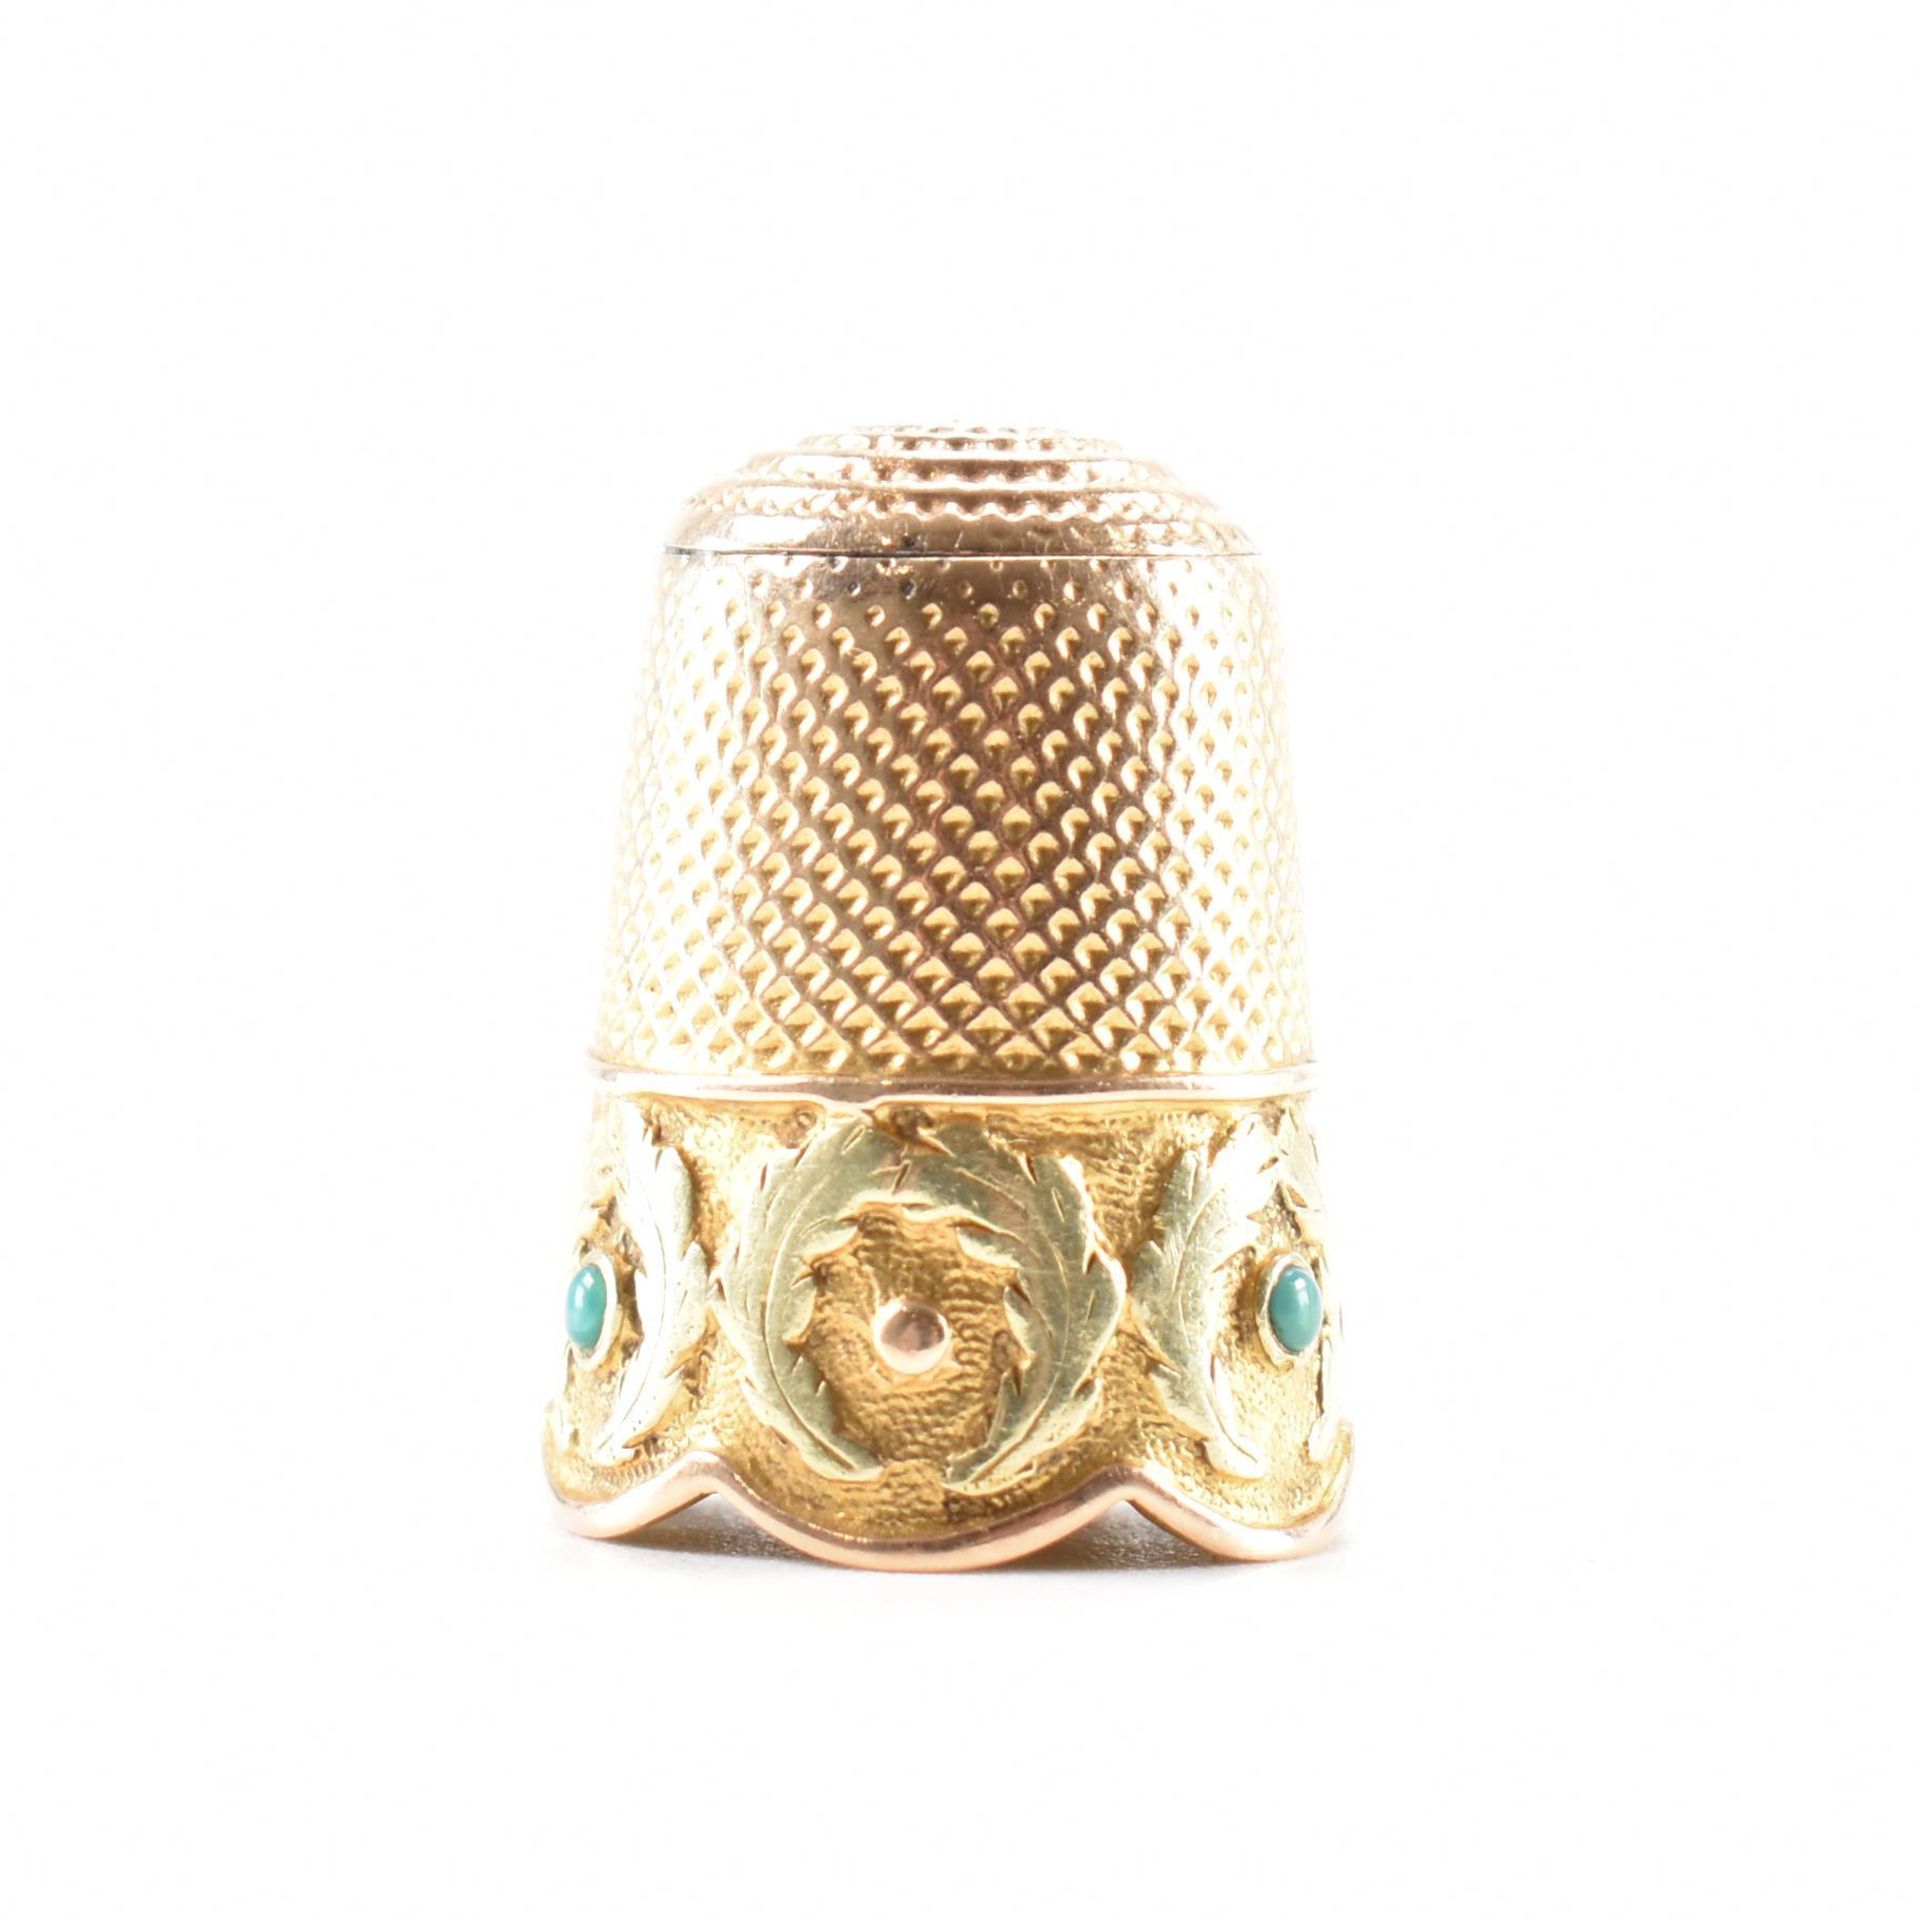 ANTIQUE GOLD & TURQUOISE THIMBLE - Image 4 of 7